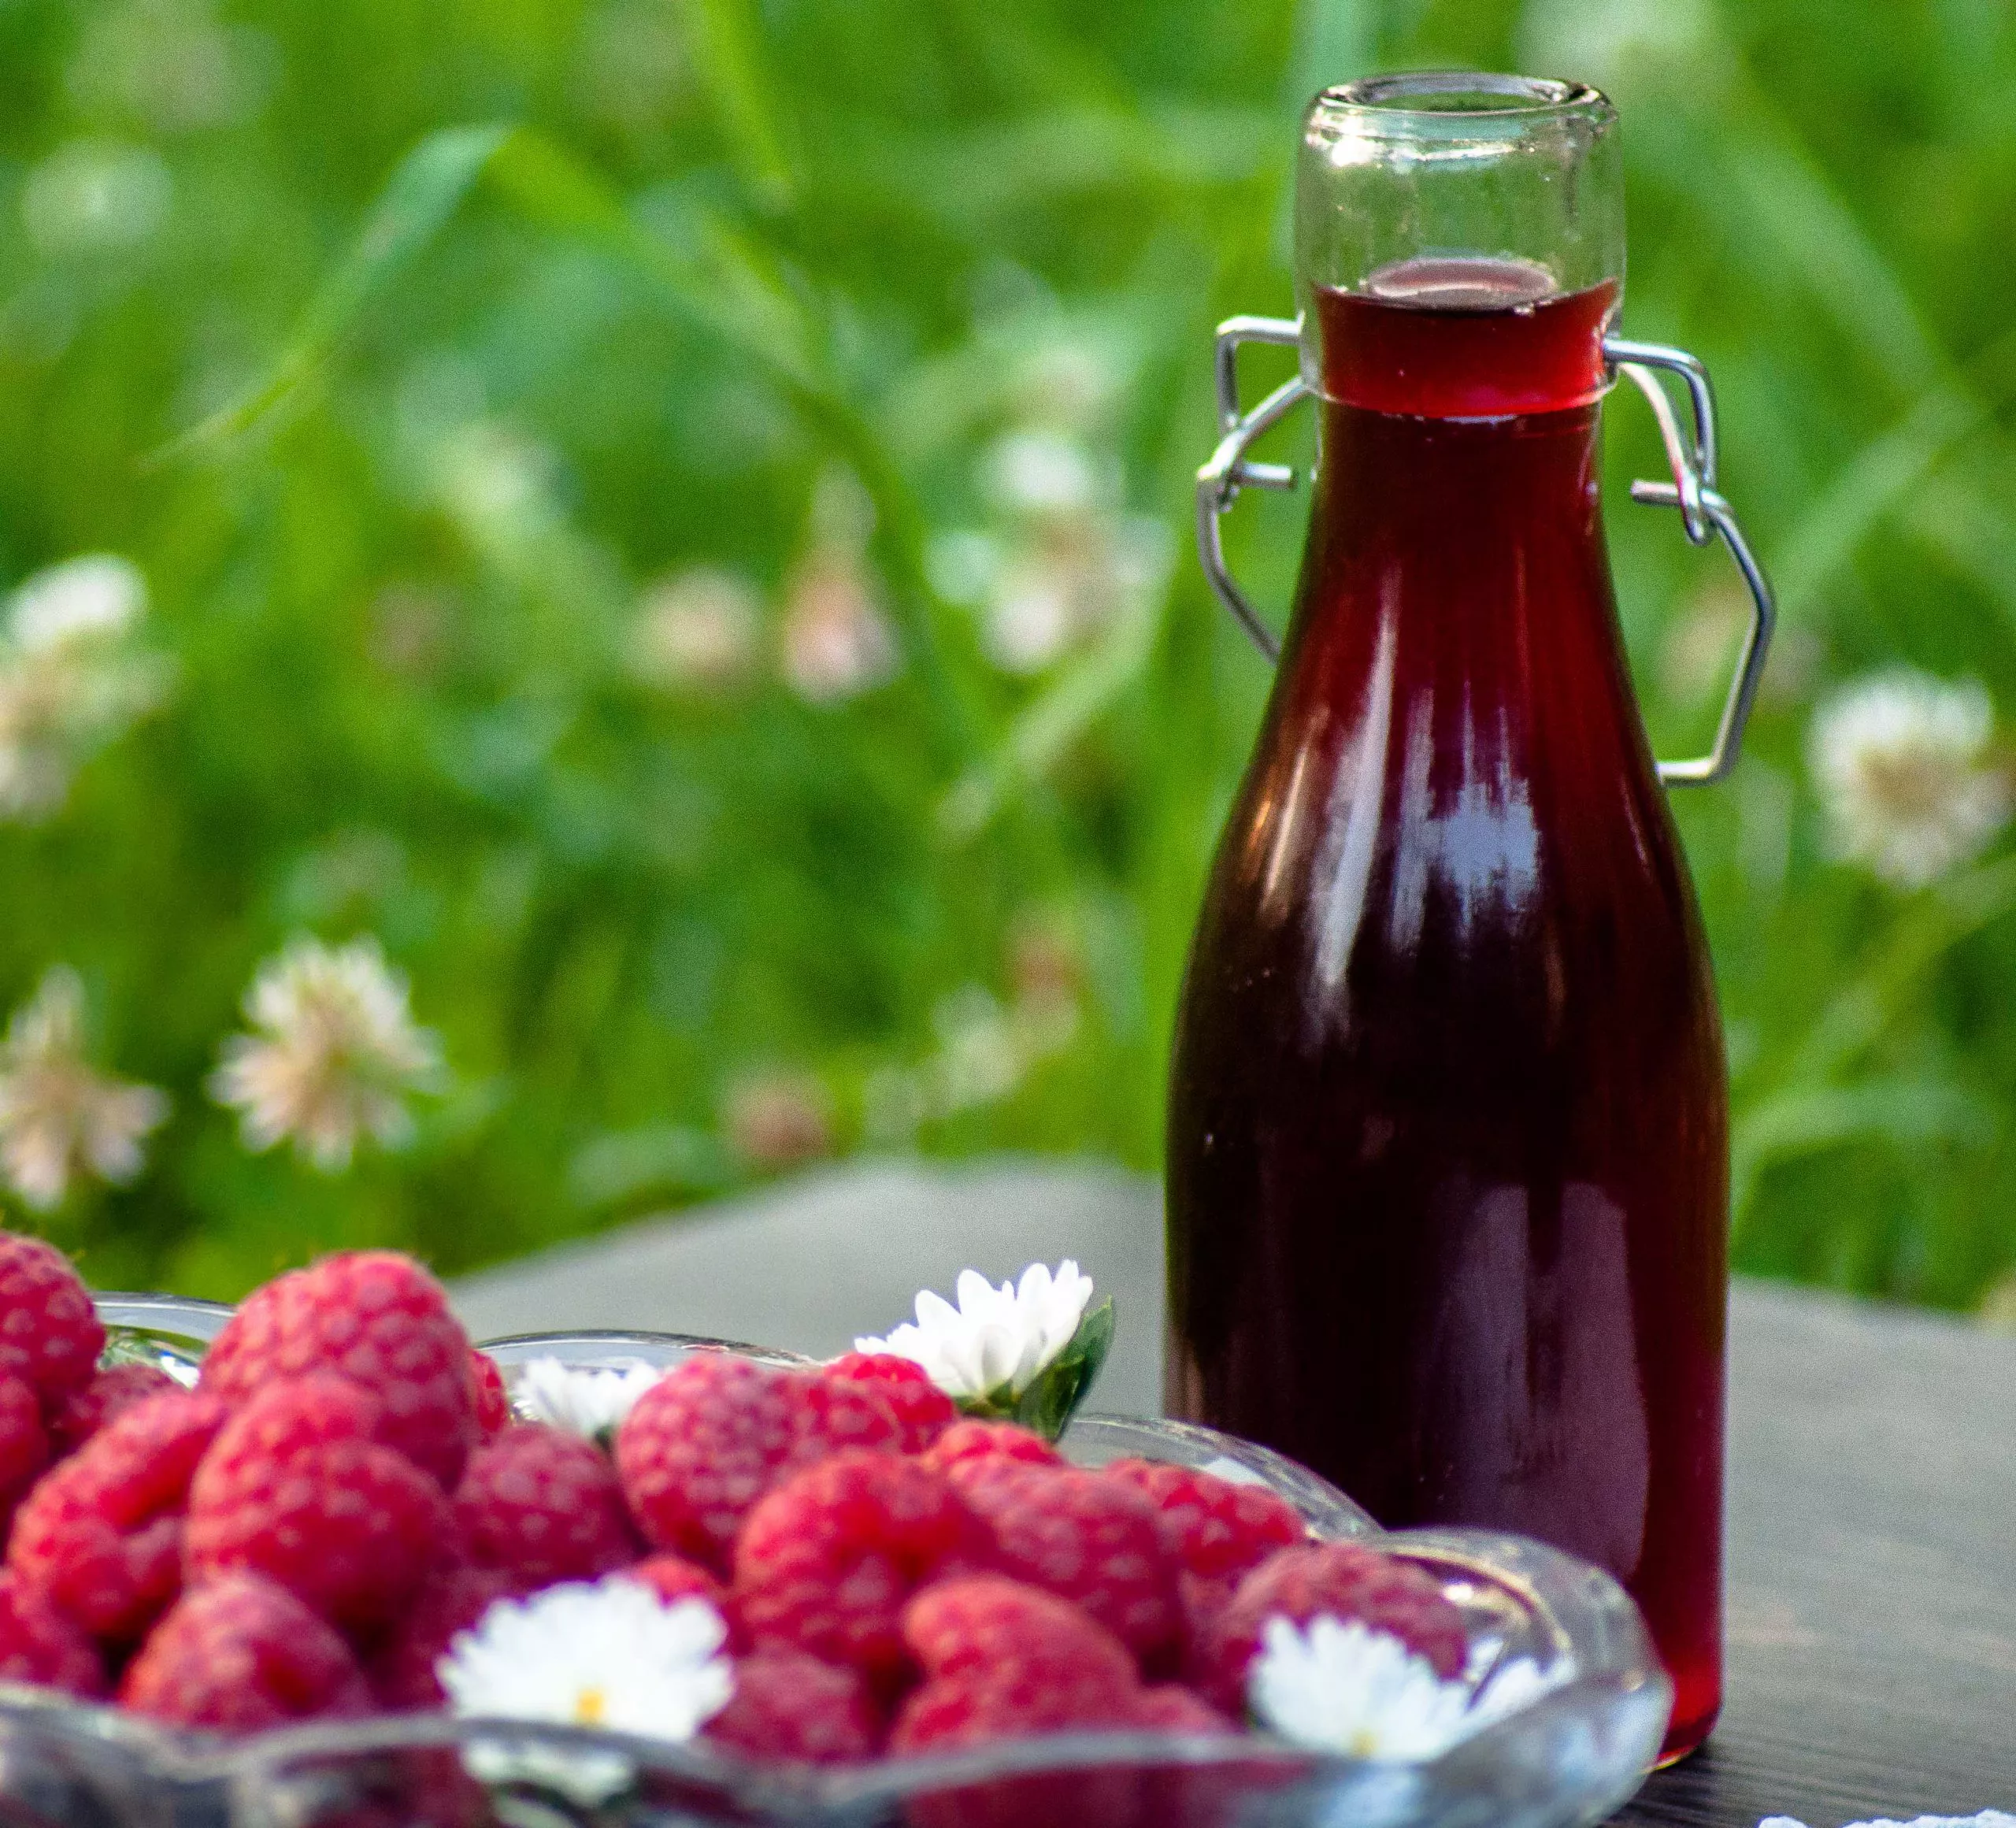 Bottle full of raspberry syrup behind a plateful of ripe raspberry decorated with three daisies; blurred green grass in the background.